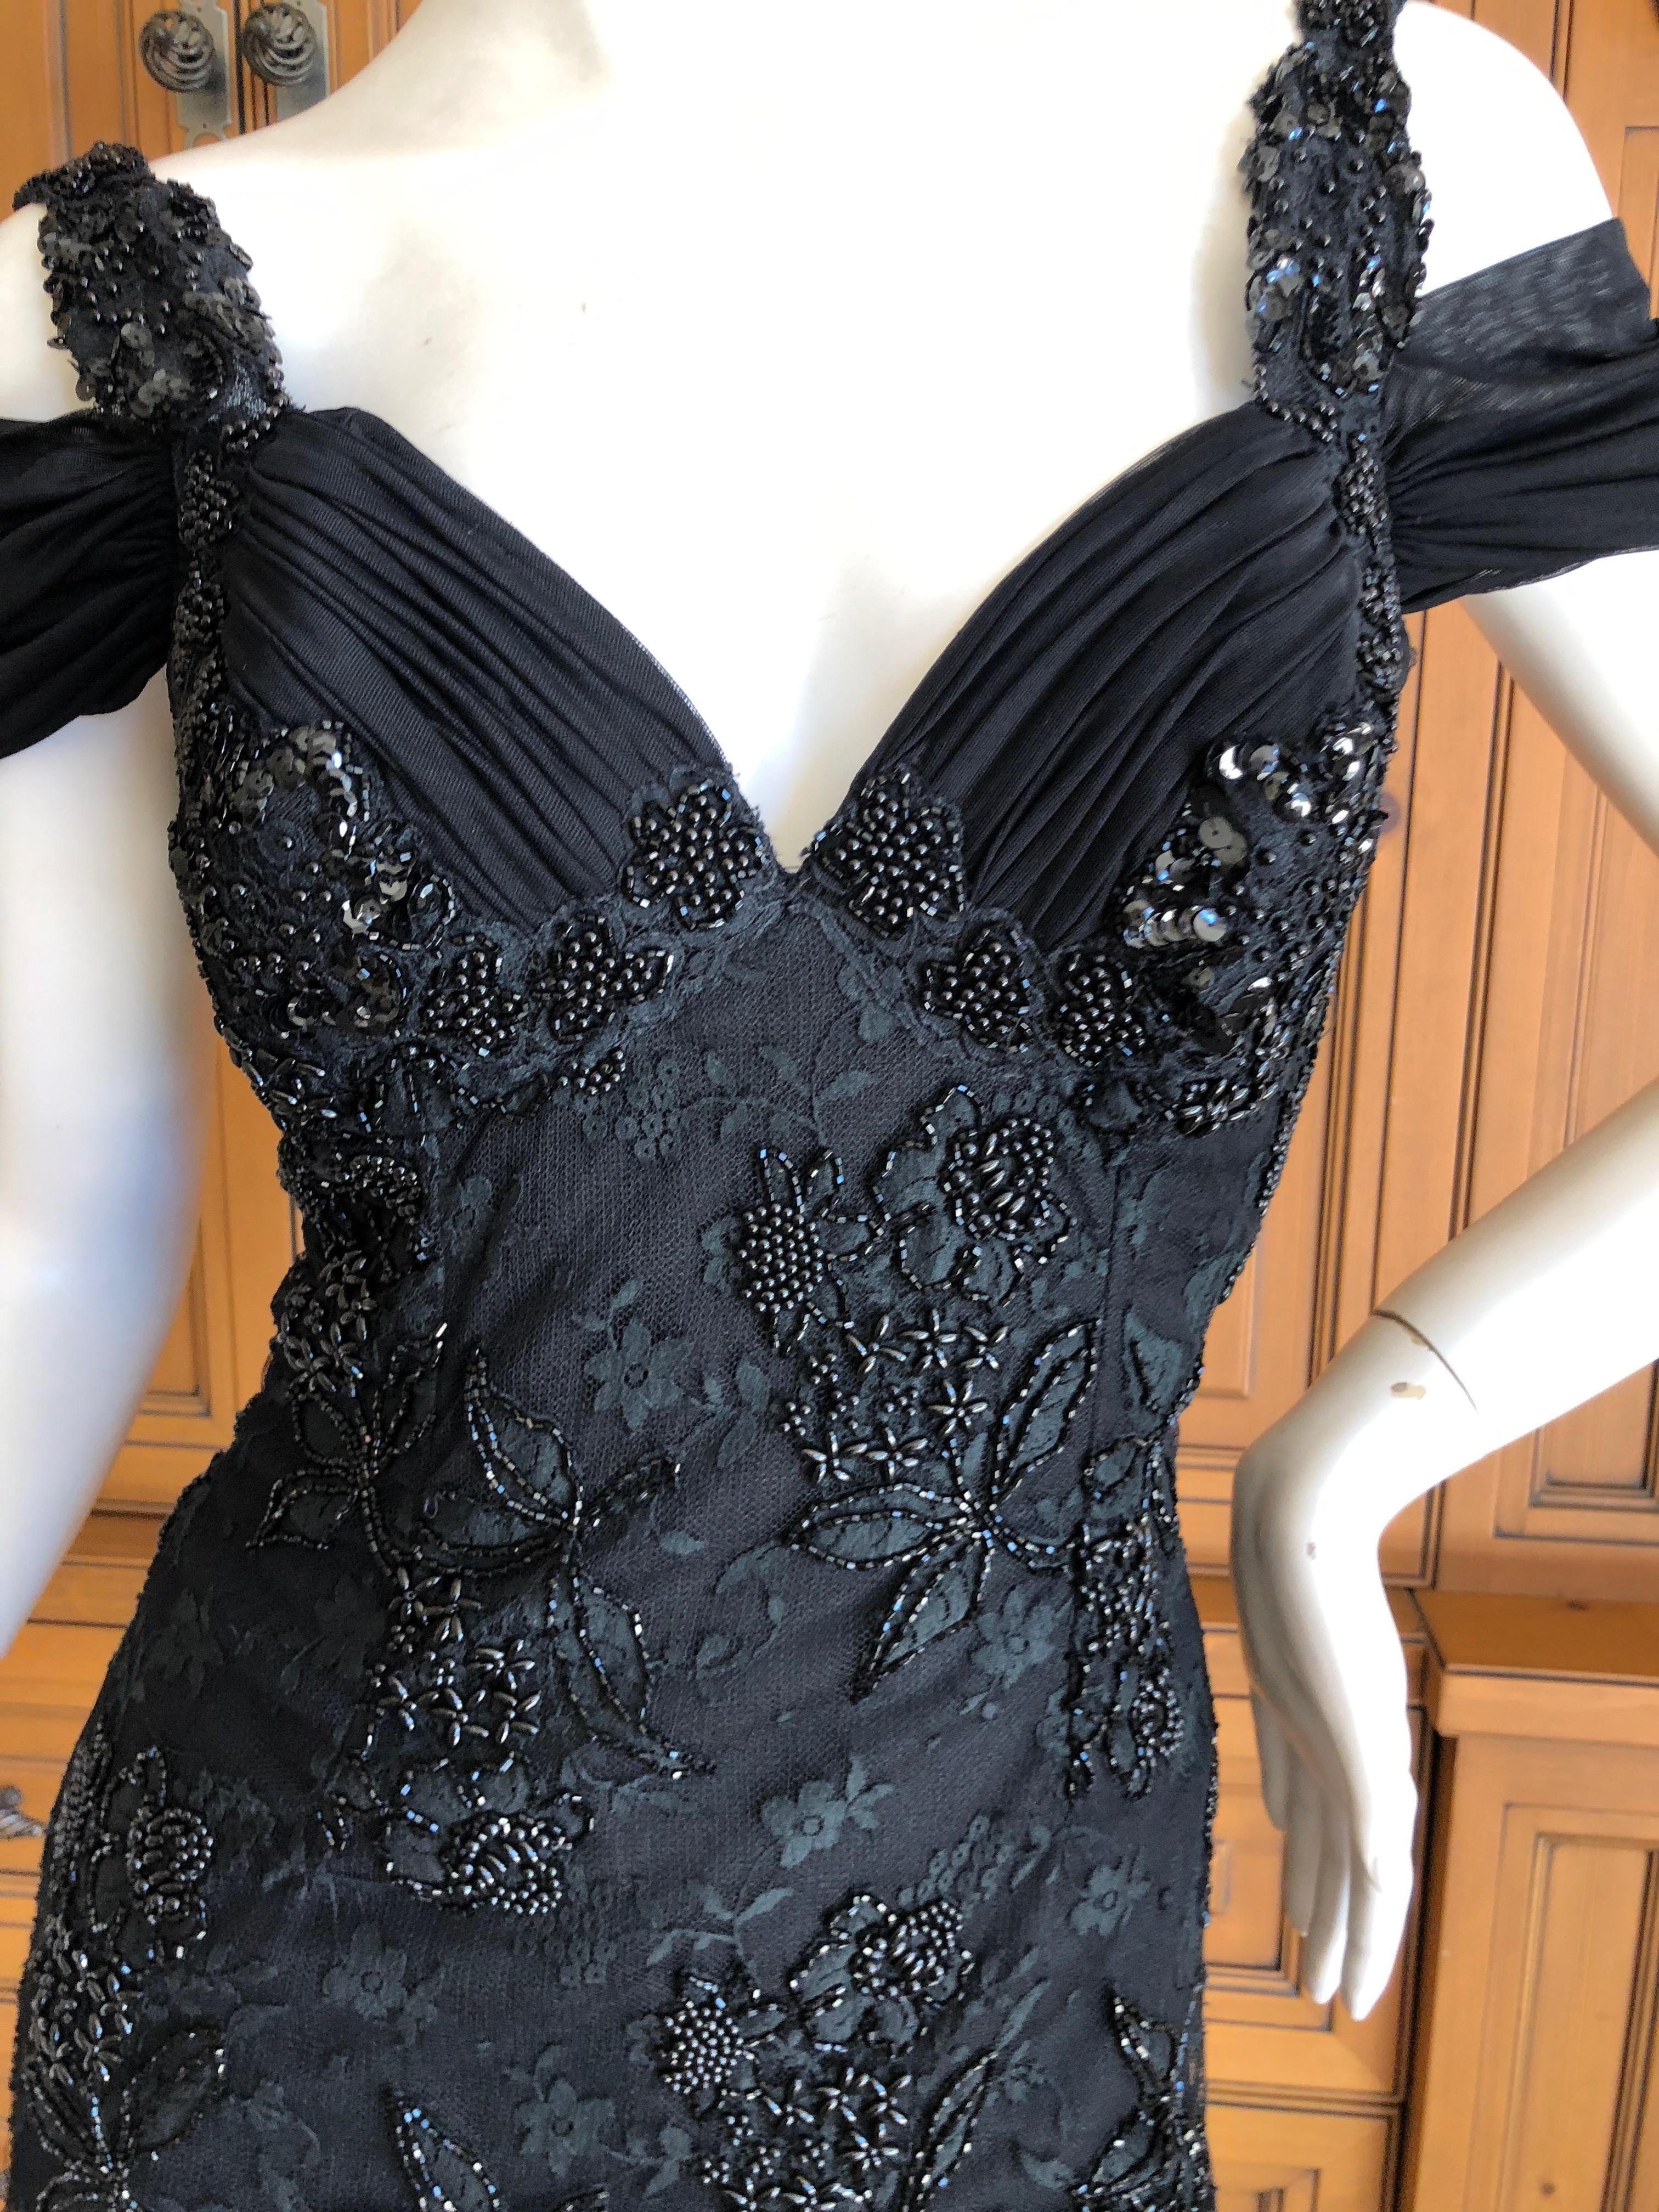 Black Vicky Tiel Couture Paris Bergdorf Goodman 1980's Beaded Evening Cocktail Dress For Sale